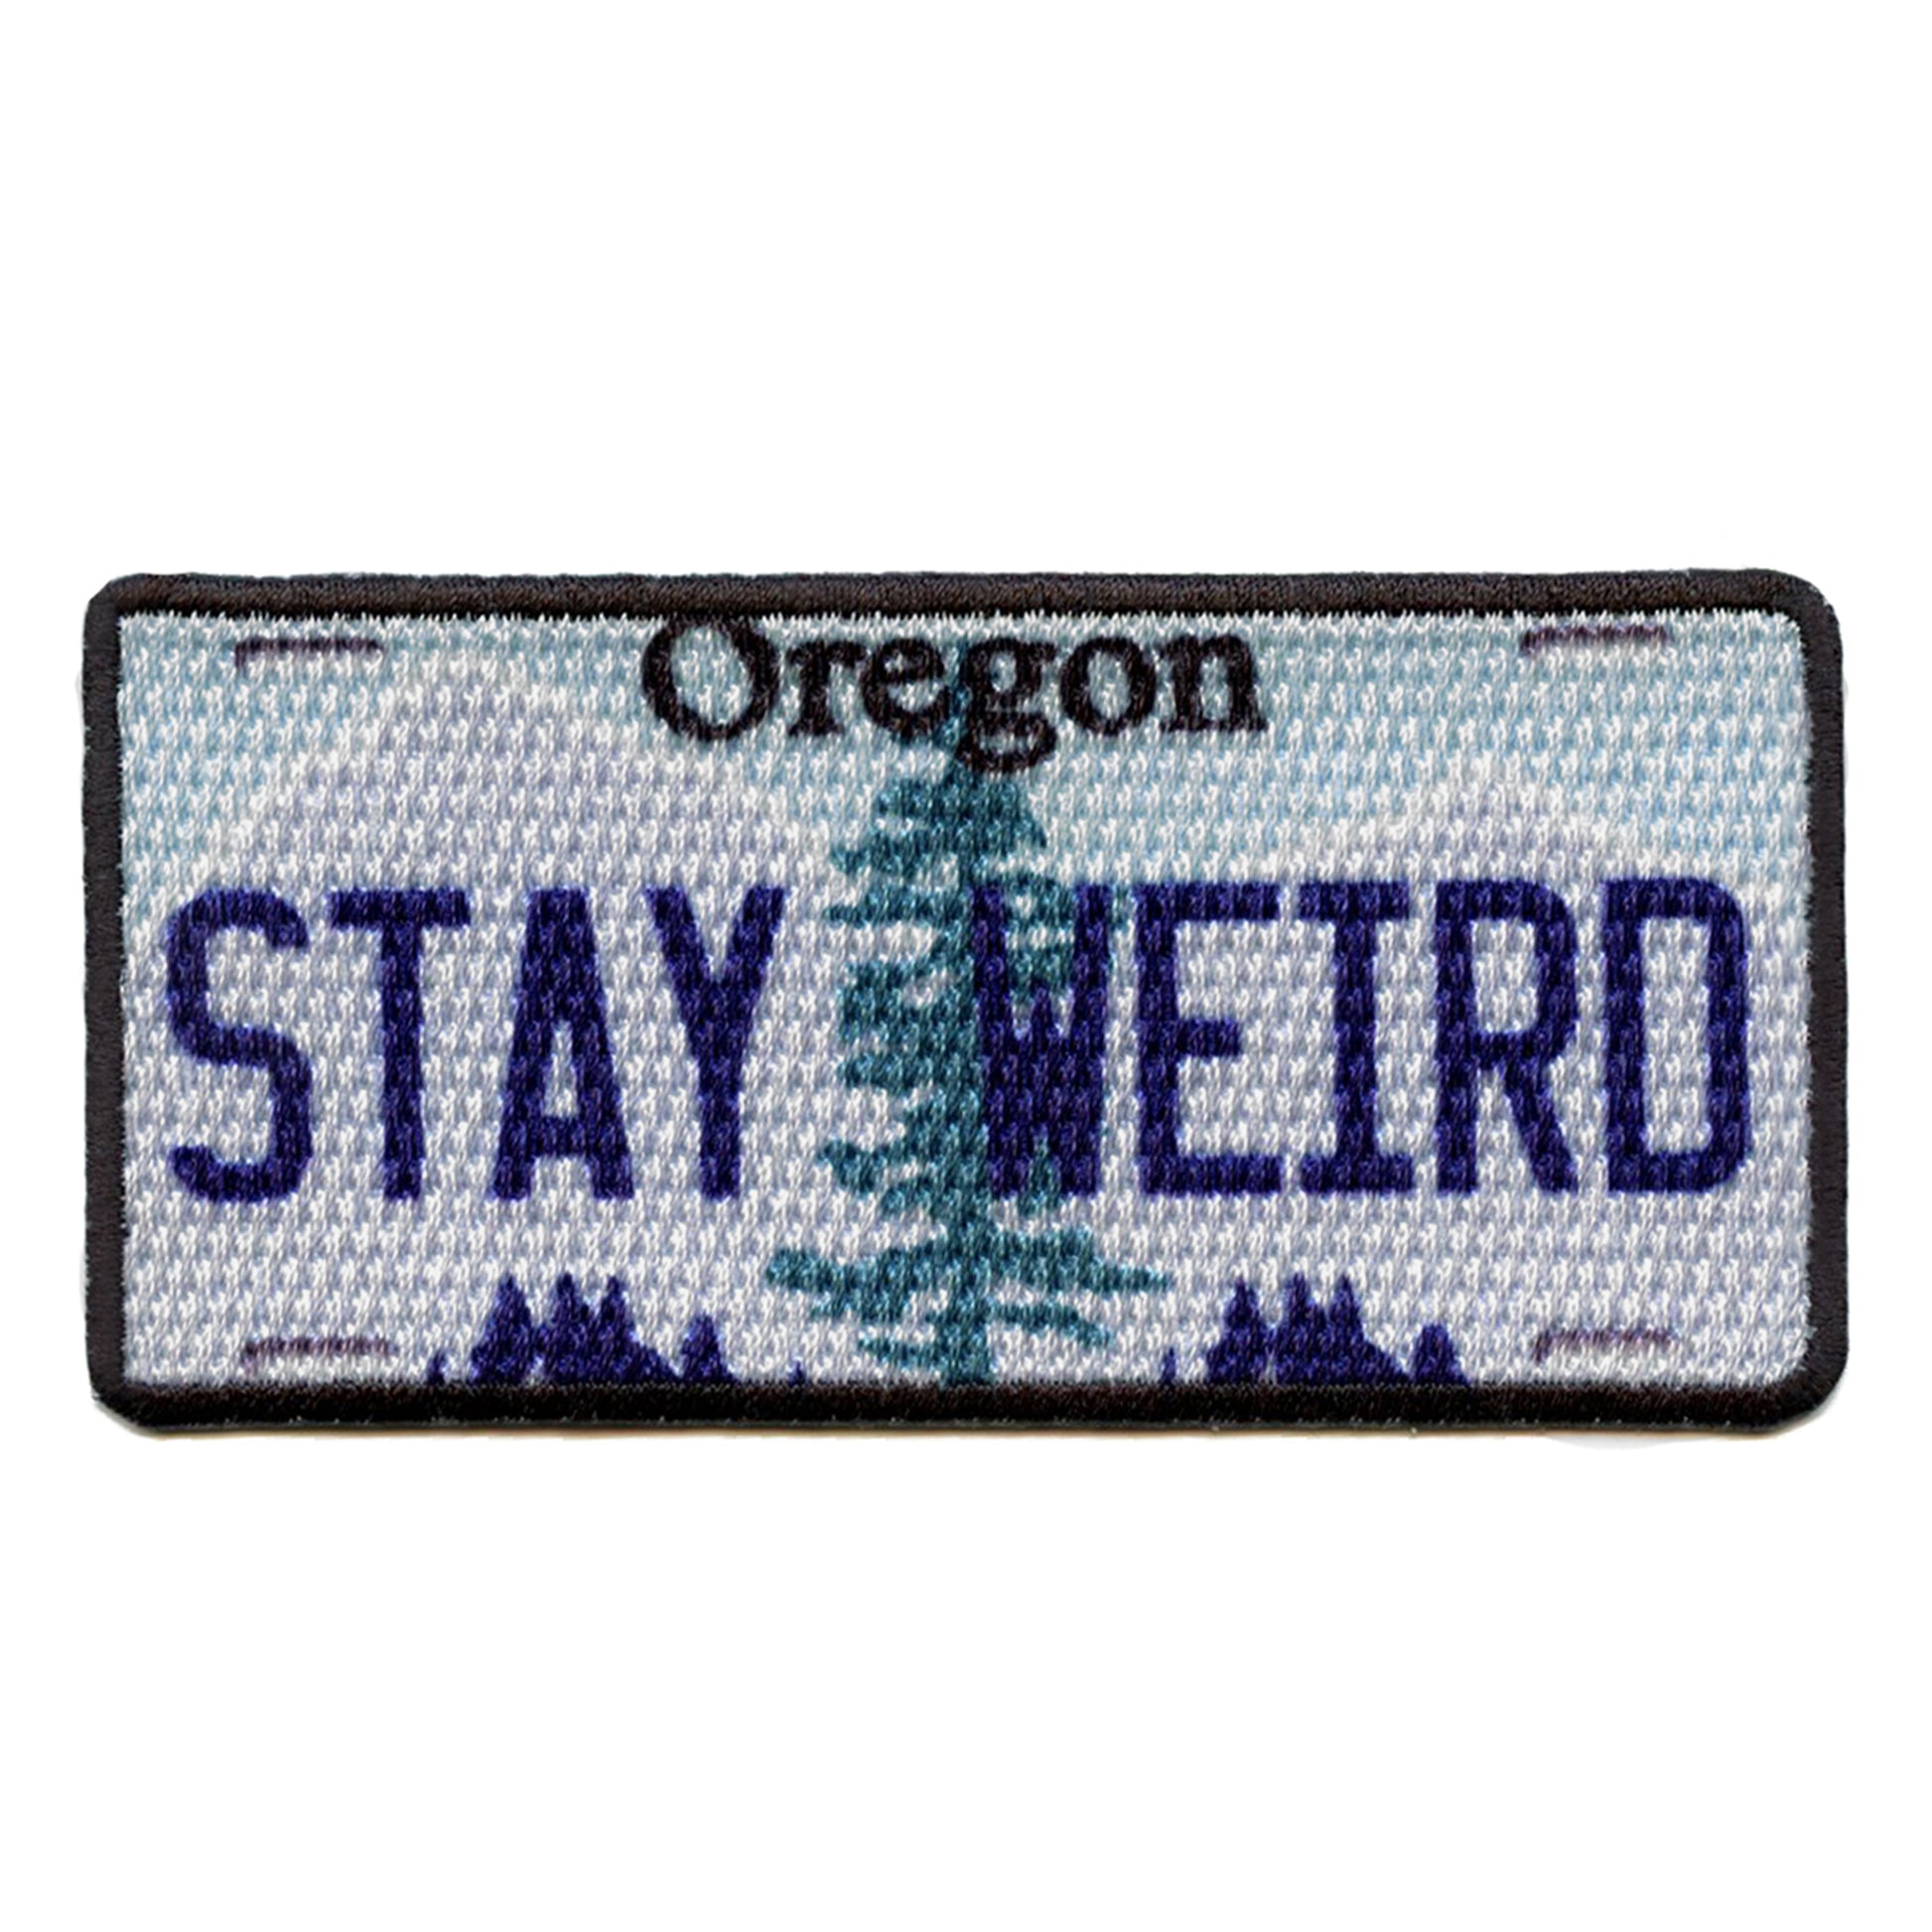 Oregon State License Plate Patch Weird Weird Trees Sublimated Iron On